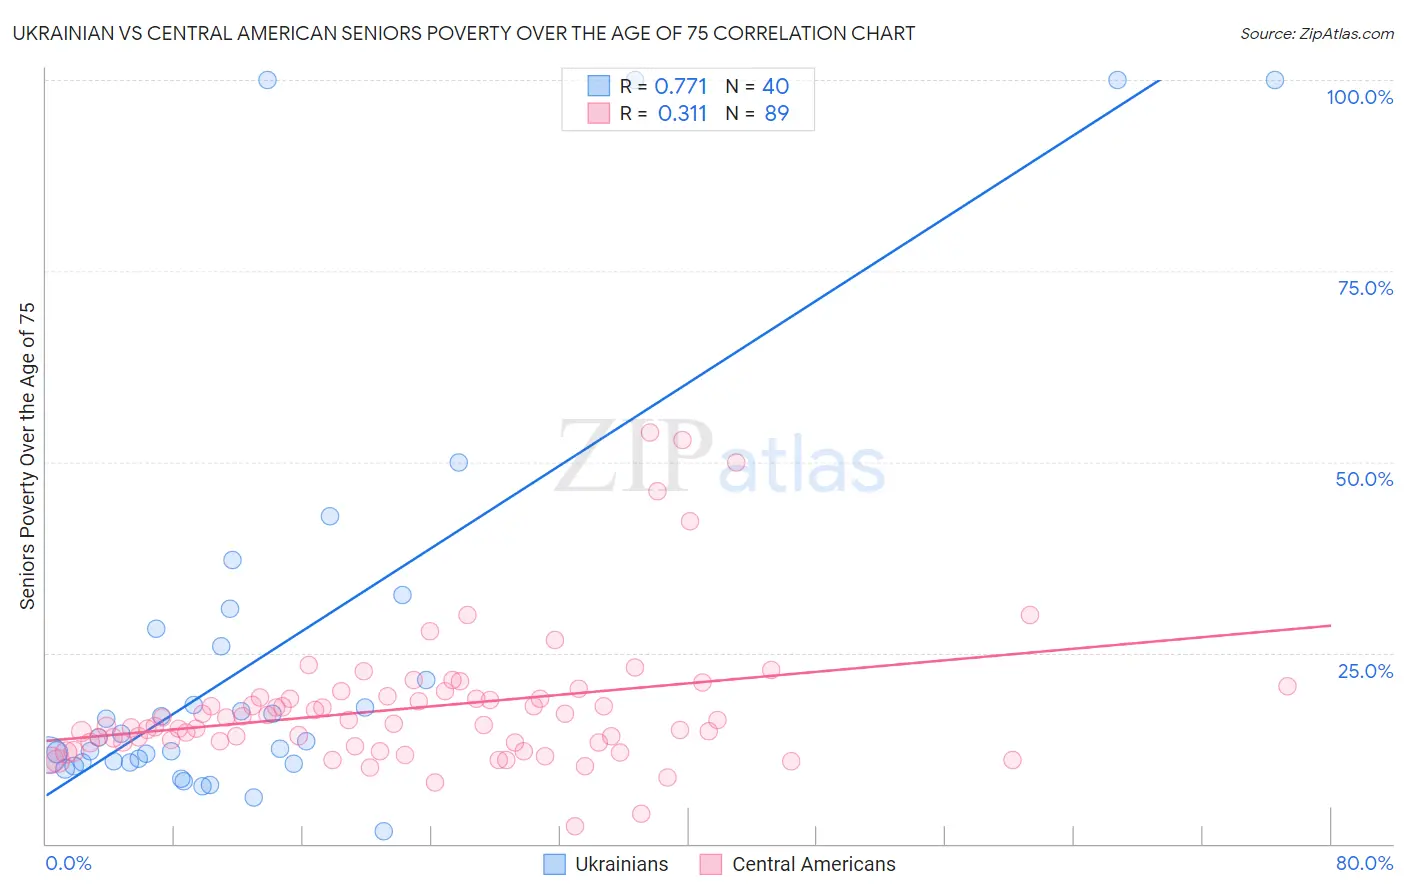 Ukrainian vs Central American Seniors Poverty Over the Age of 75